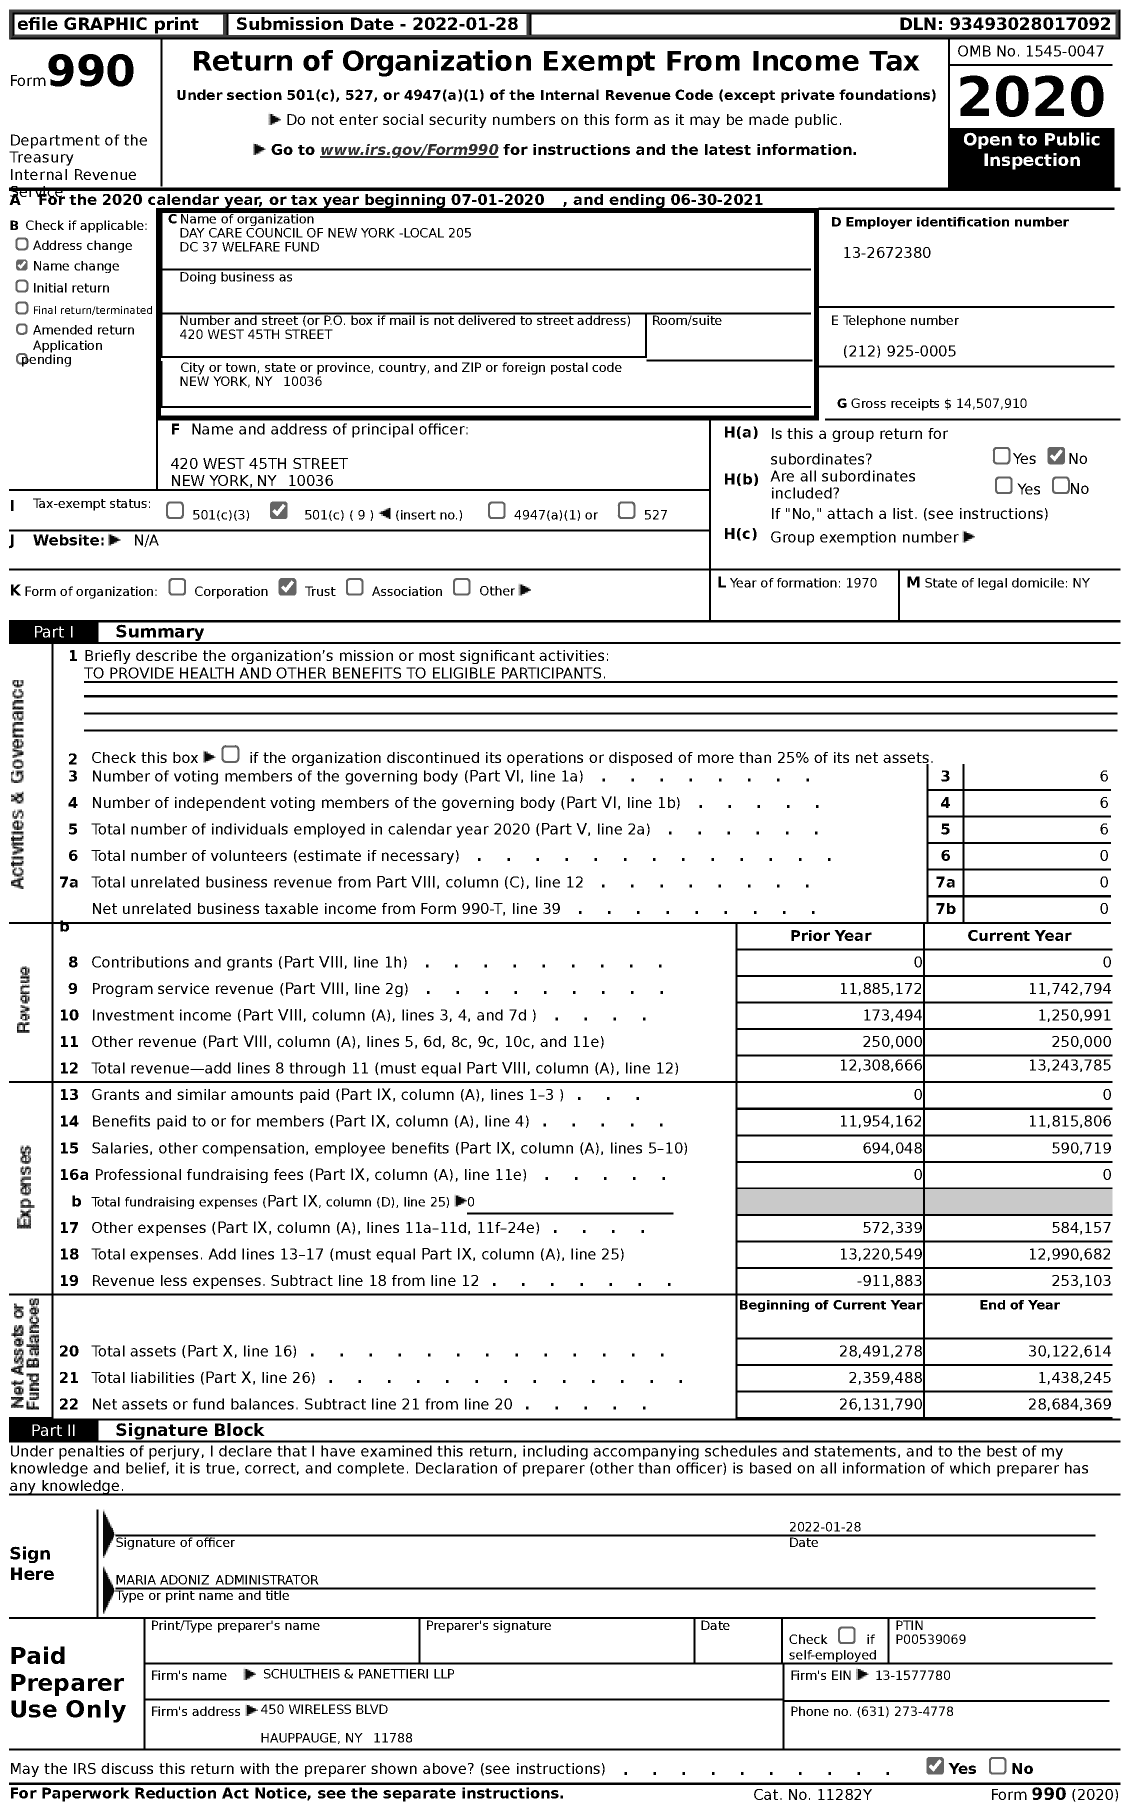 Image of first page of 2020 Form 990 for Day Care Council of New York -local 205 DC 37 Welfare Fund